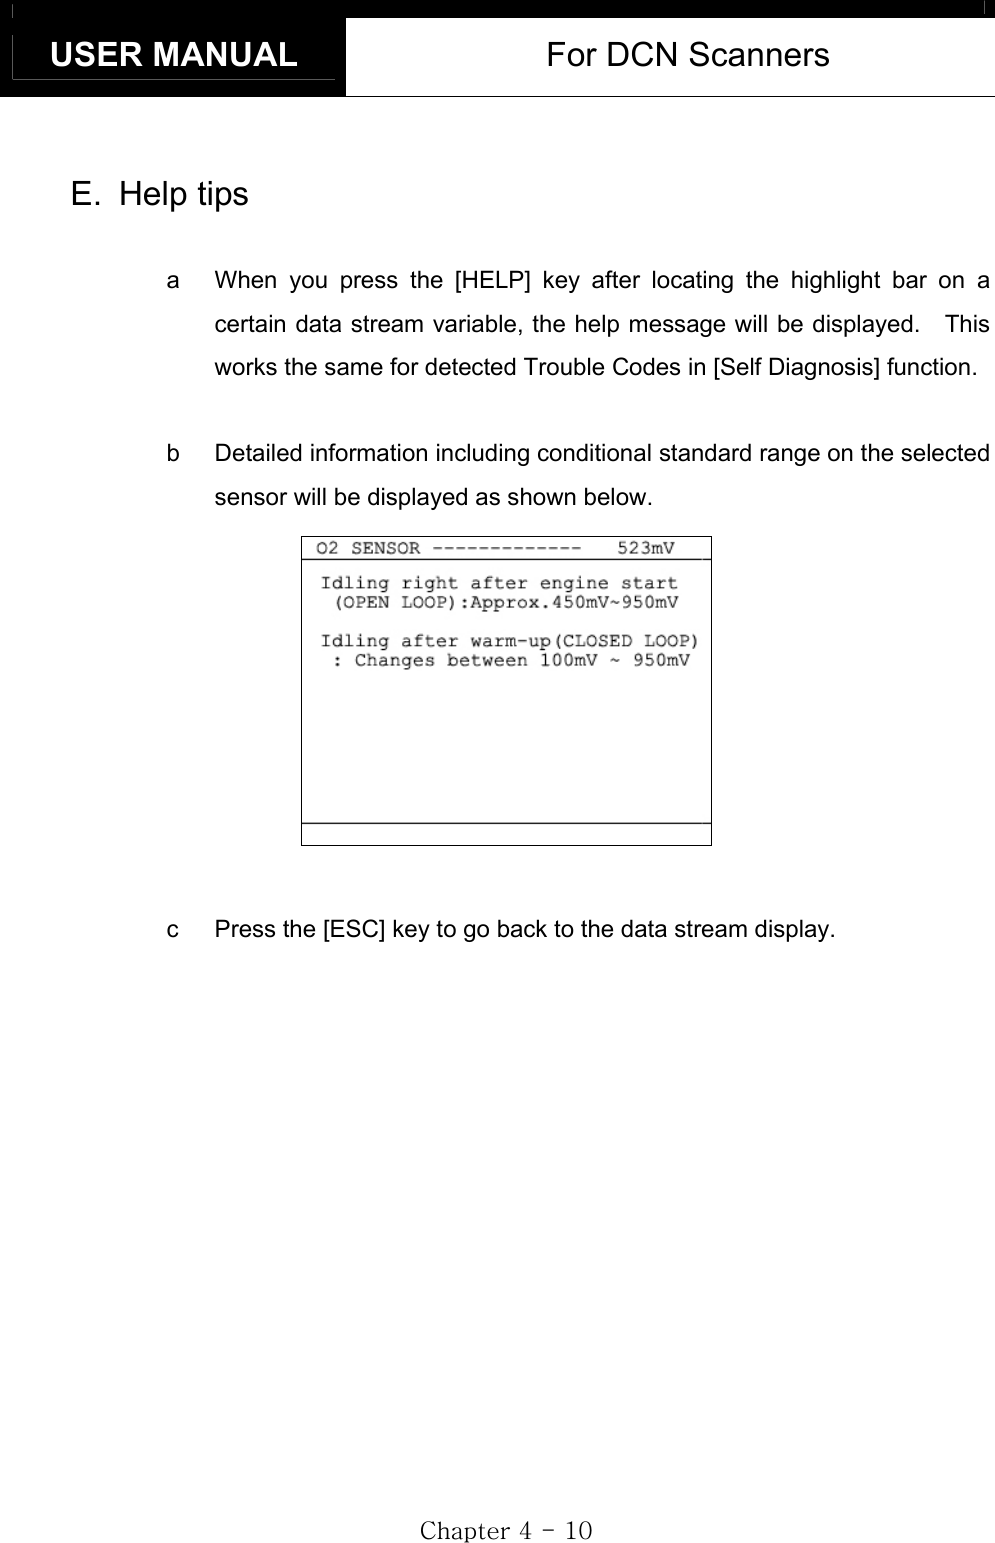 USER MANUAL  For DCN Scanners GjG[GTGXWGE. Help tips a  When you press the [HELP] key after locating the highlight bar on a certain data stream variable, the help message will be displayed.    This works the same for detected Trouble Codes in [Self Diagnosis] function. b  Detailed information including conditional standard range on the selected sensor will be displayed as shown below.   c  Press the [ESC] key to go back to the data stream display. 